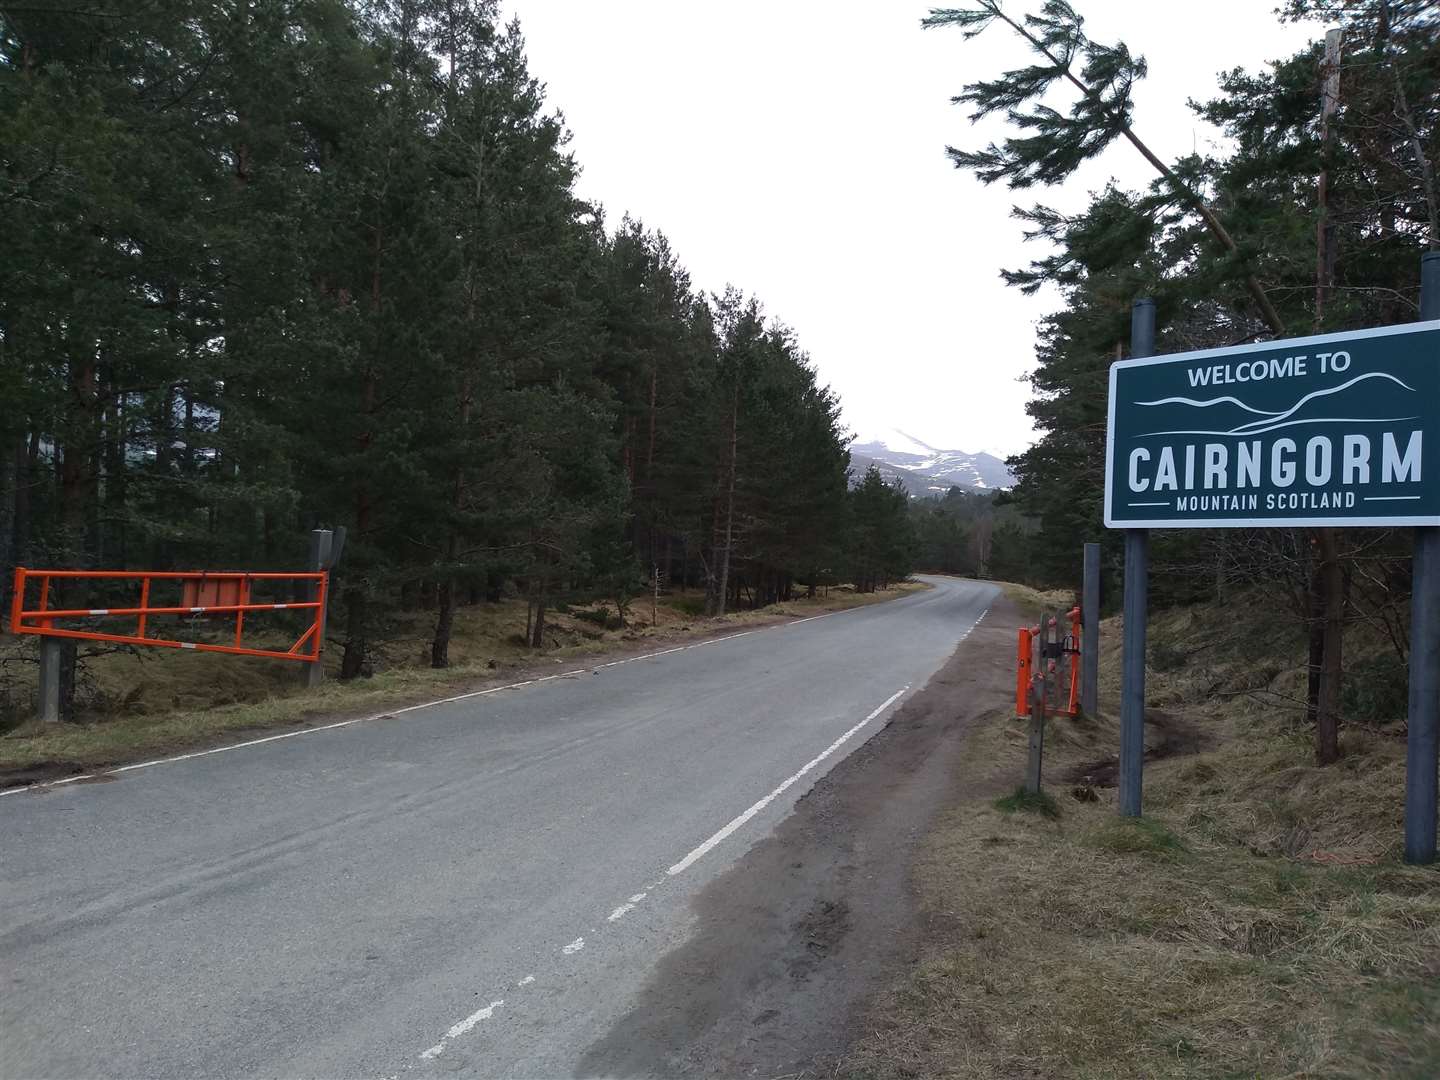 The Cairngorm ski road gates recently reopened after months of lockdown.